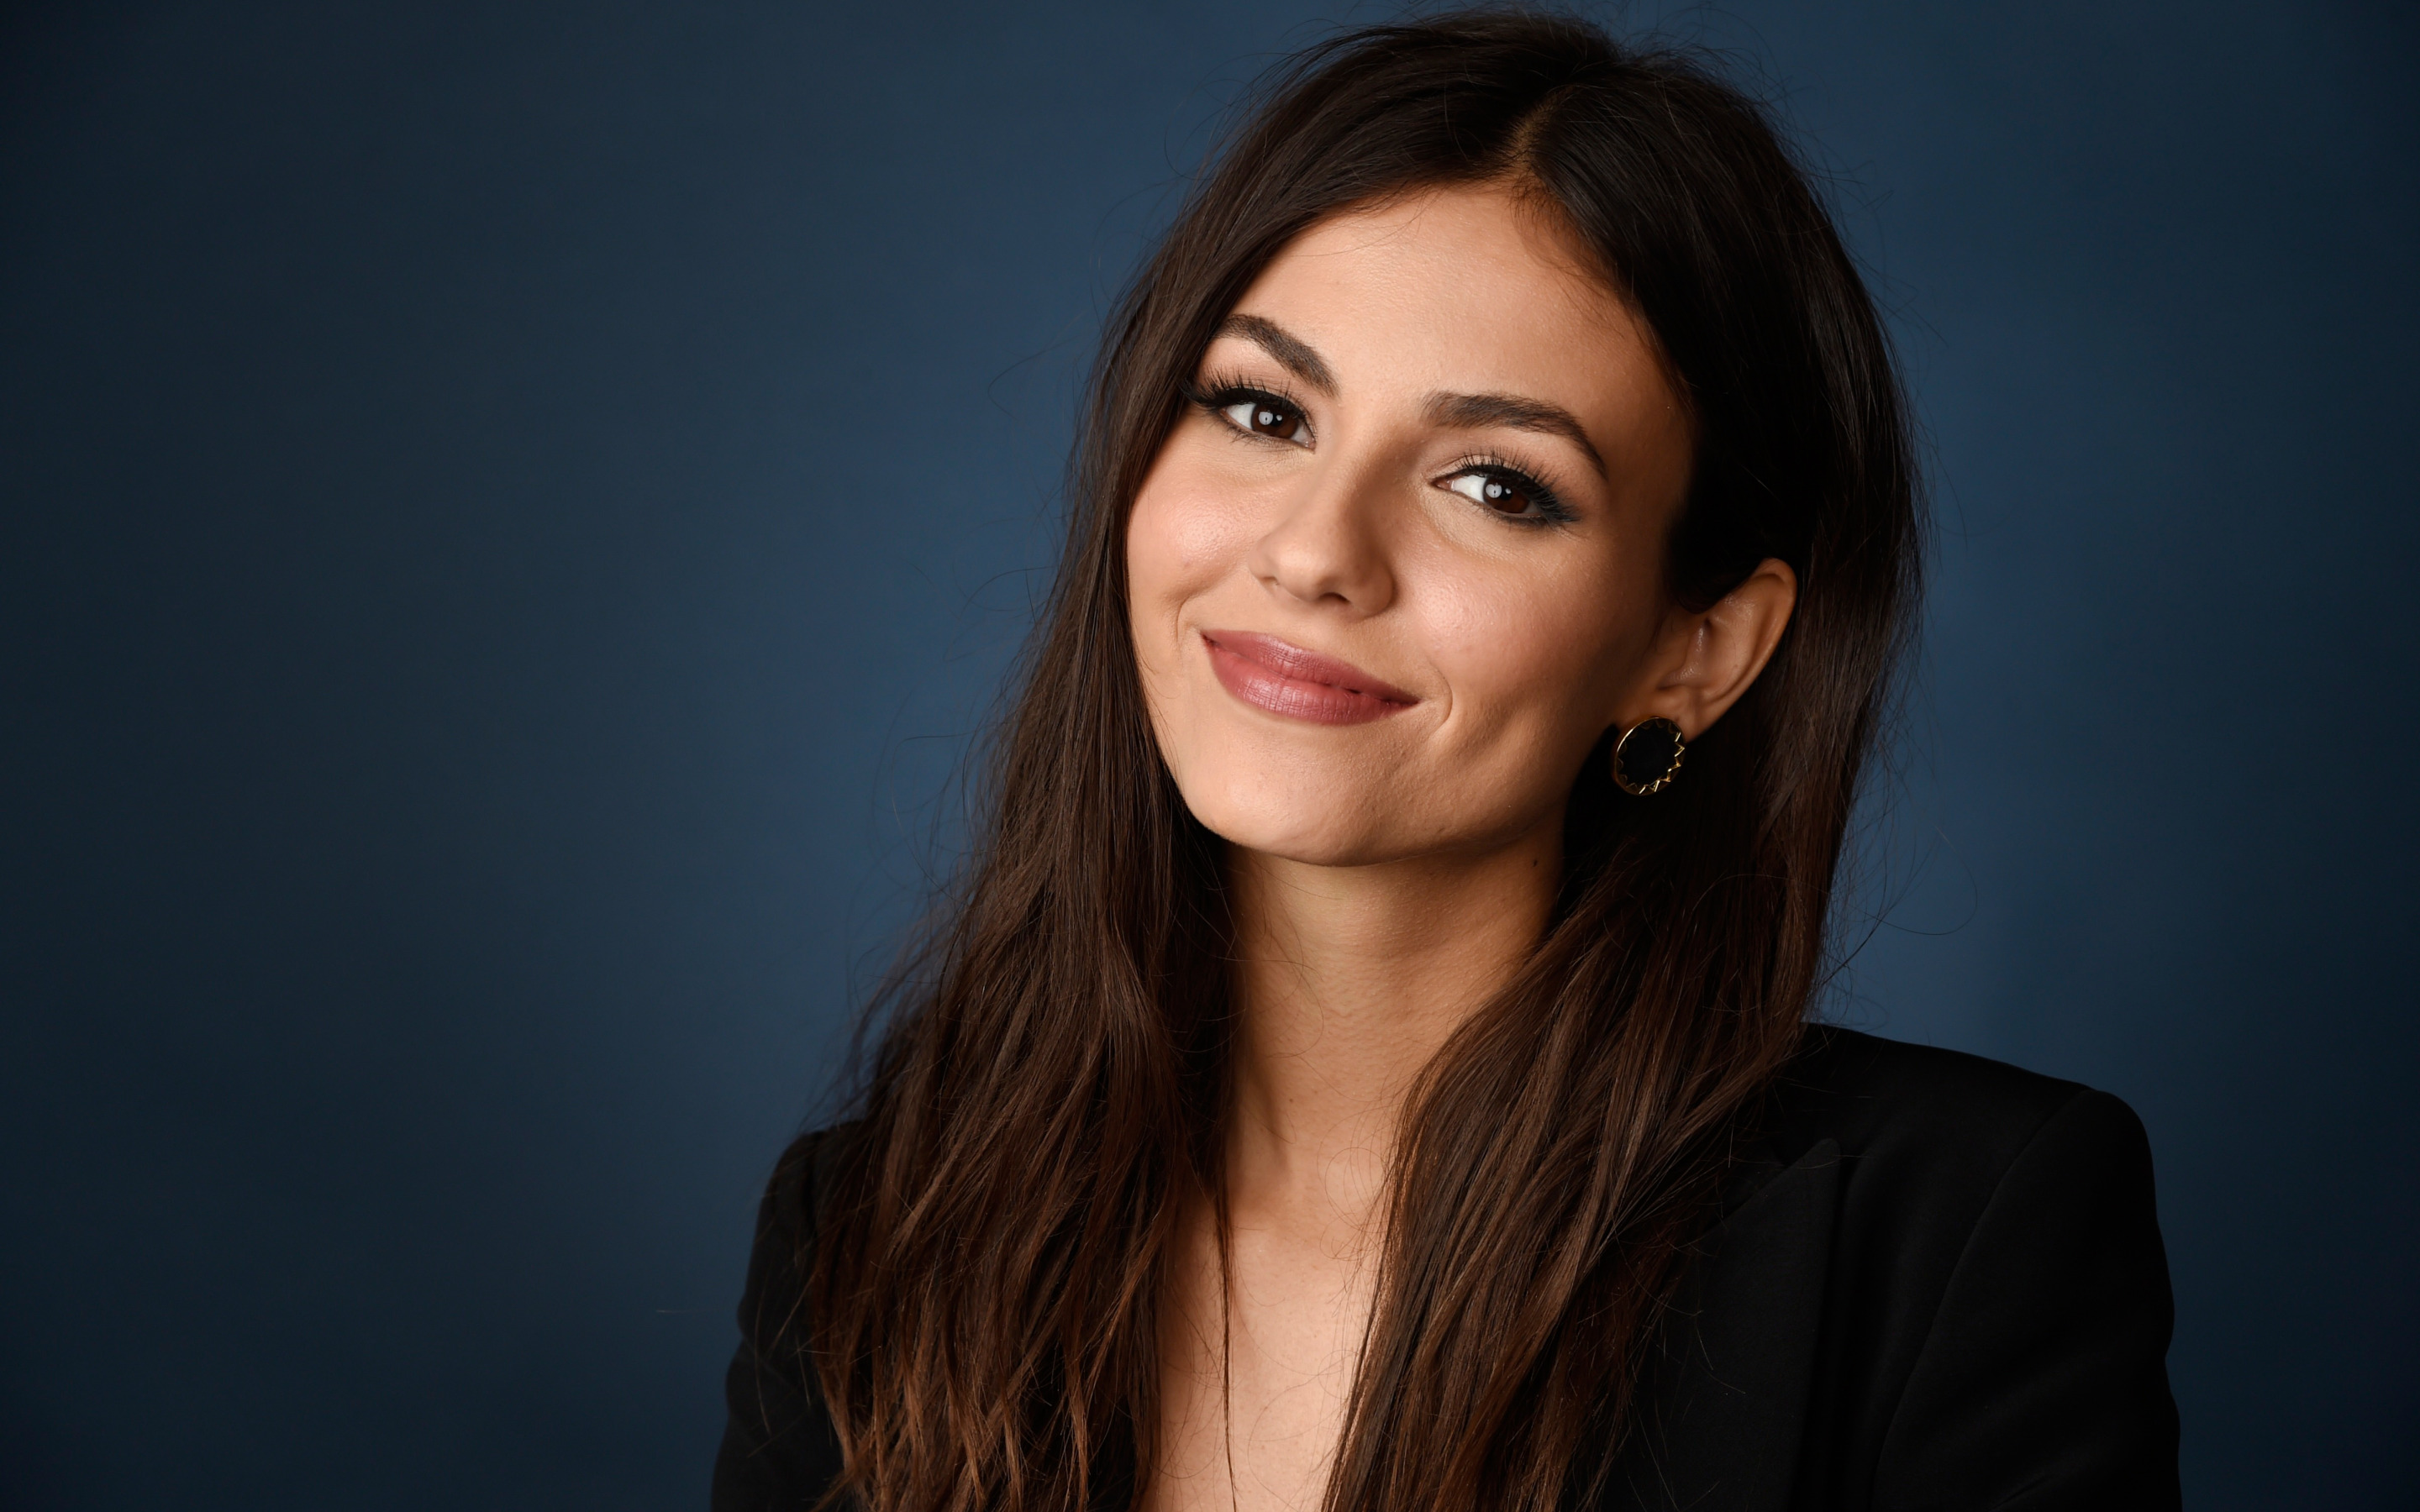 Model Women Red Lipstick Smiling Black Clothing Face Studio Celebrity Victoria Justice 2880x1800